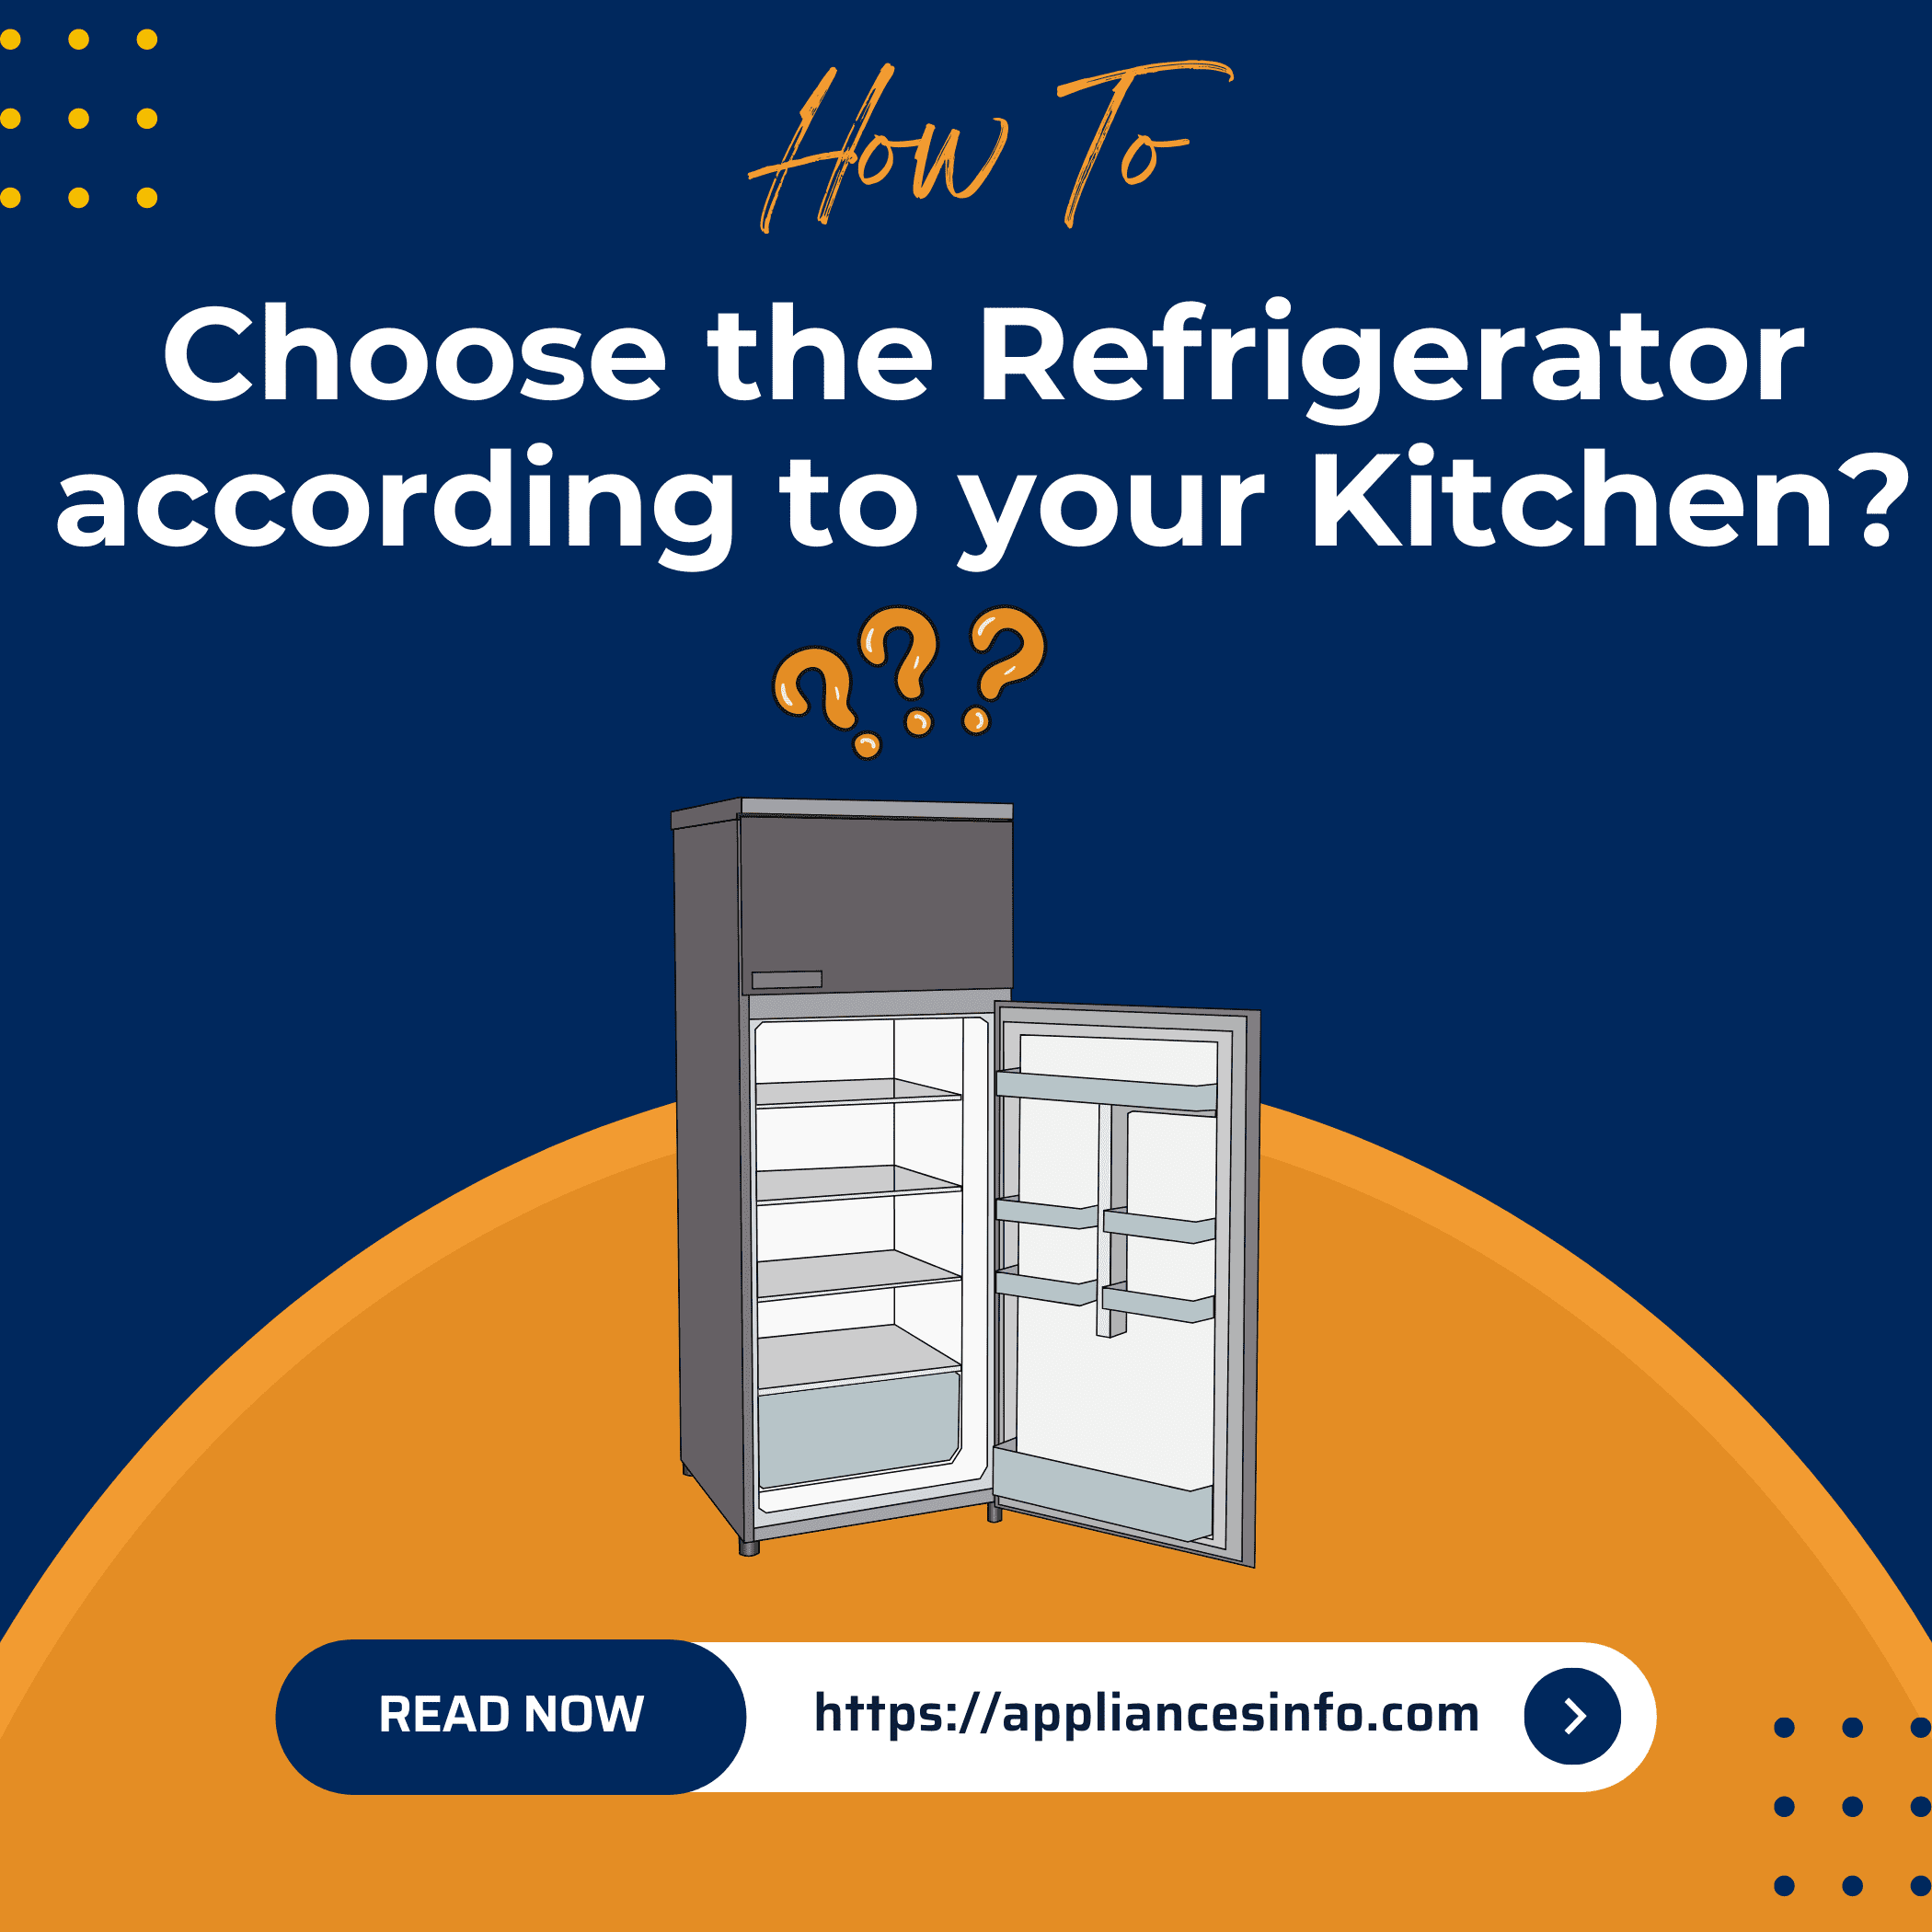 How to Choose the Refrigerator According to Your Kitchen?